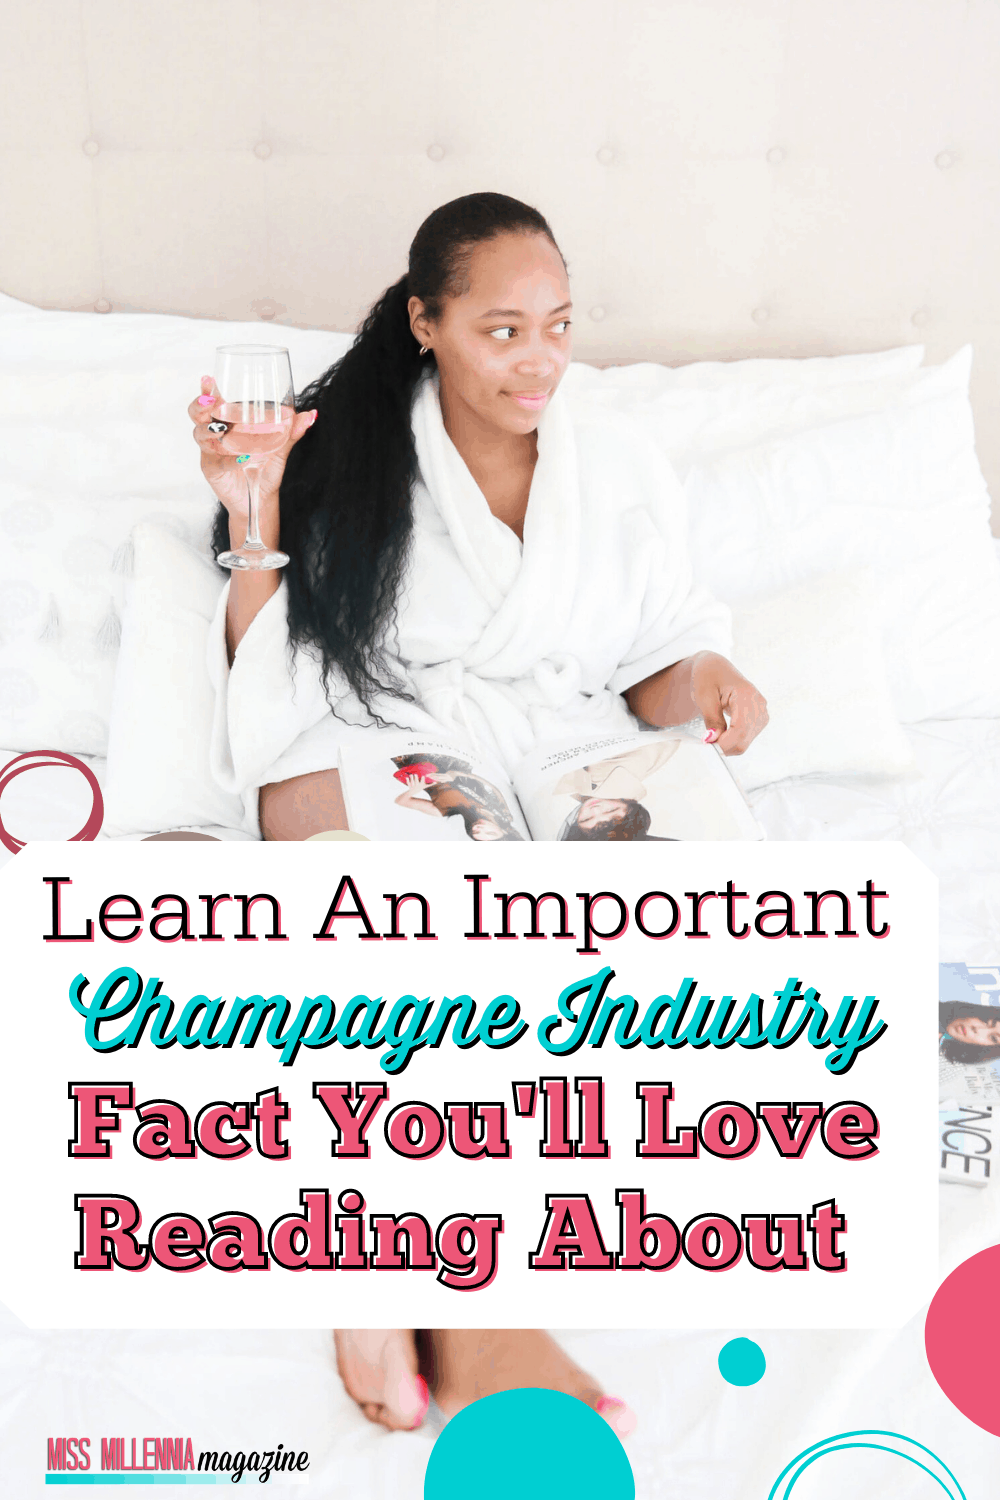 Learn An Important Champagne Industry Fact You’ll Love Reading About